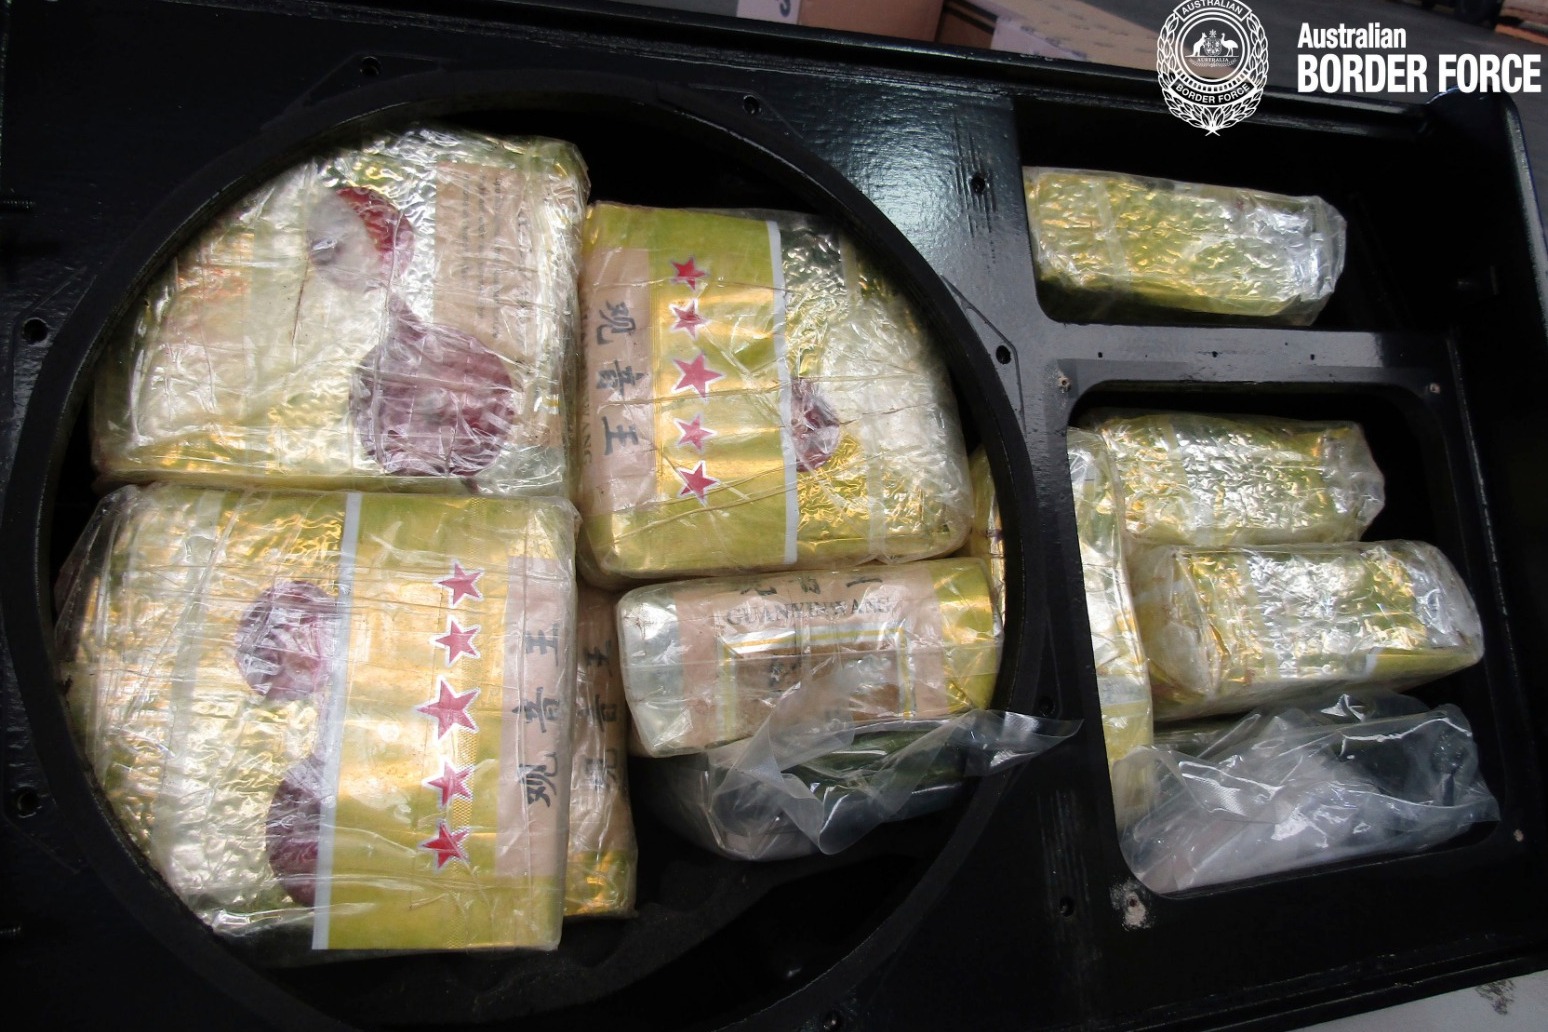 THREE FACE COURT AFTER AUSTRALIA\'S LARGEST CRYSTAL METH SEIZURE 